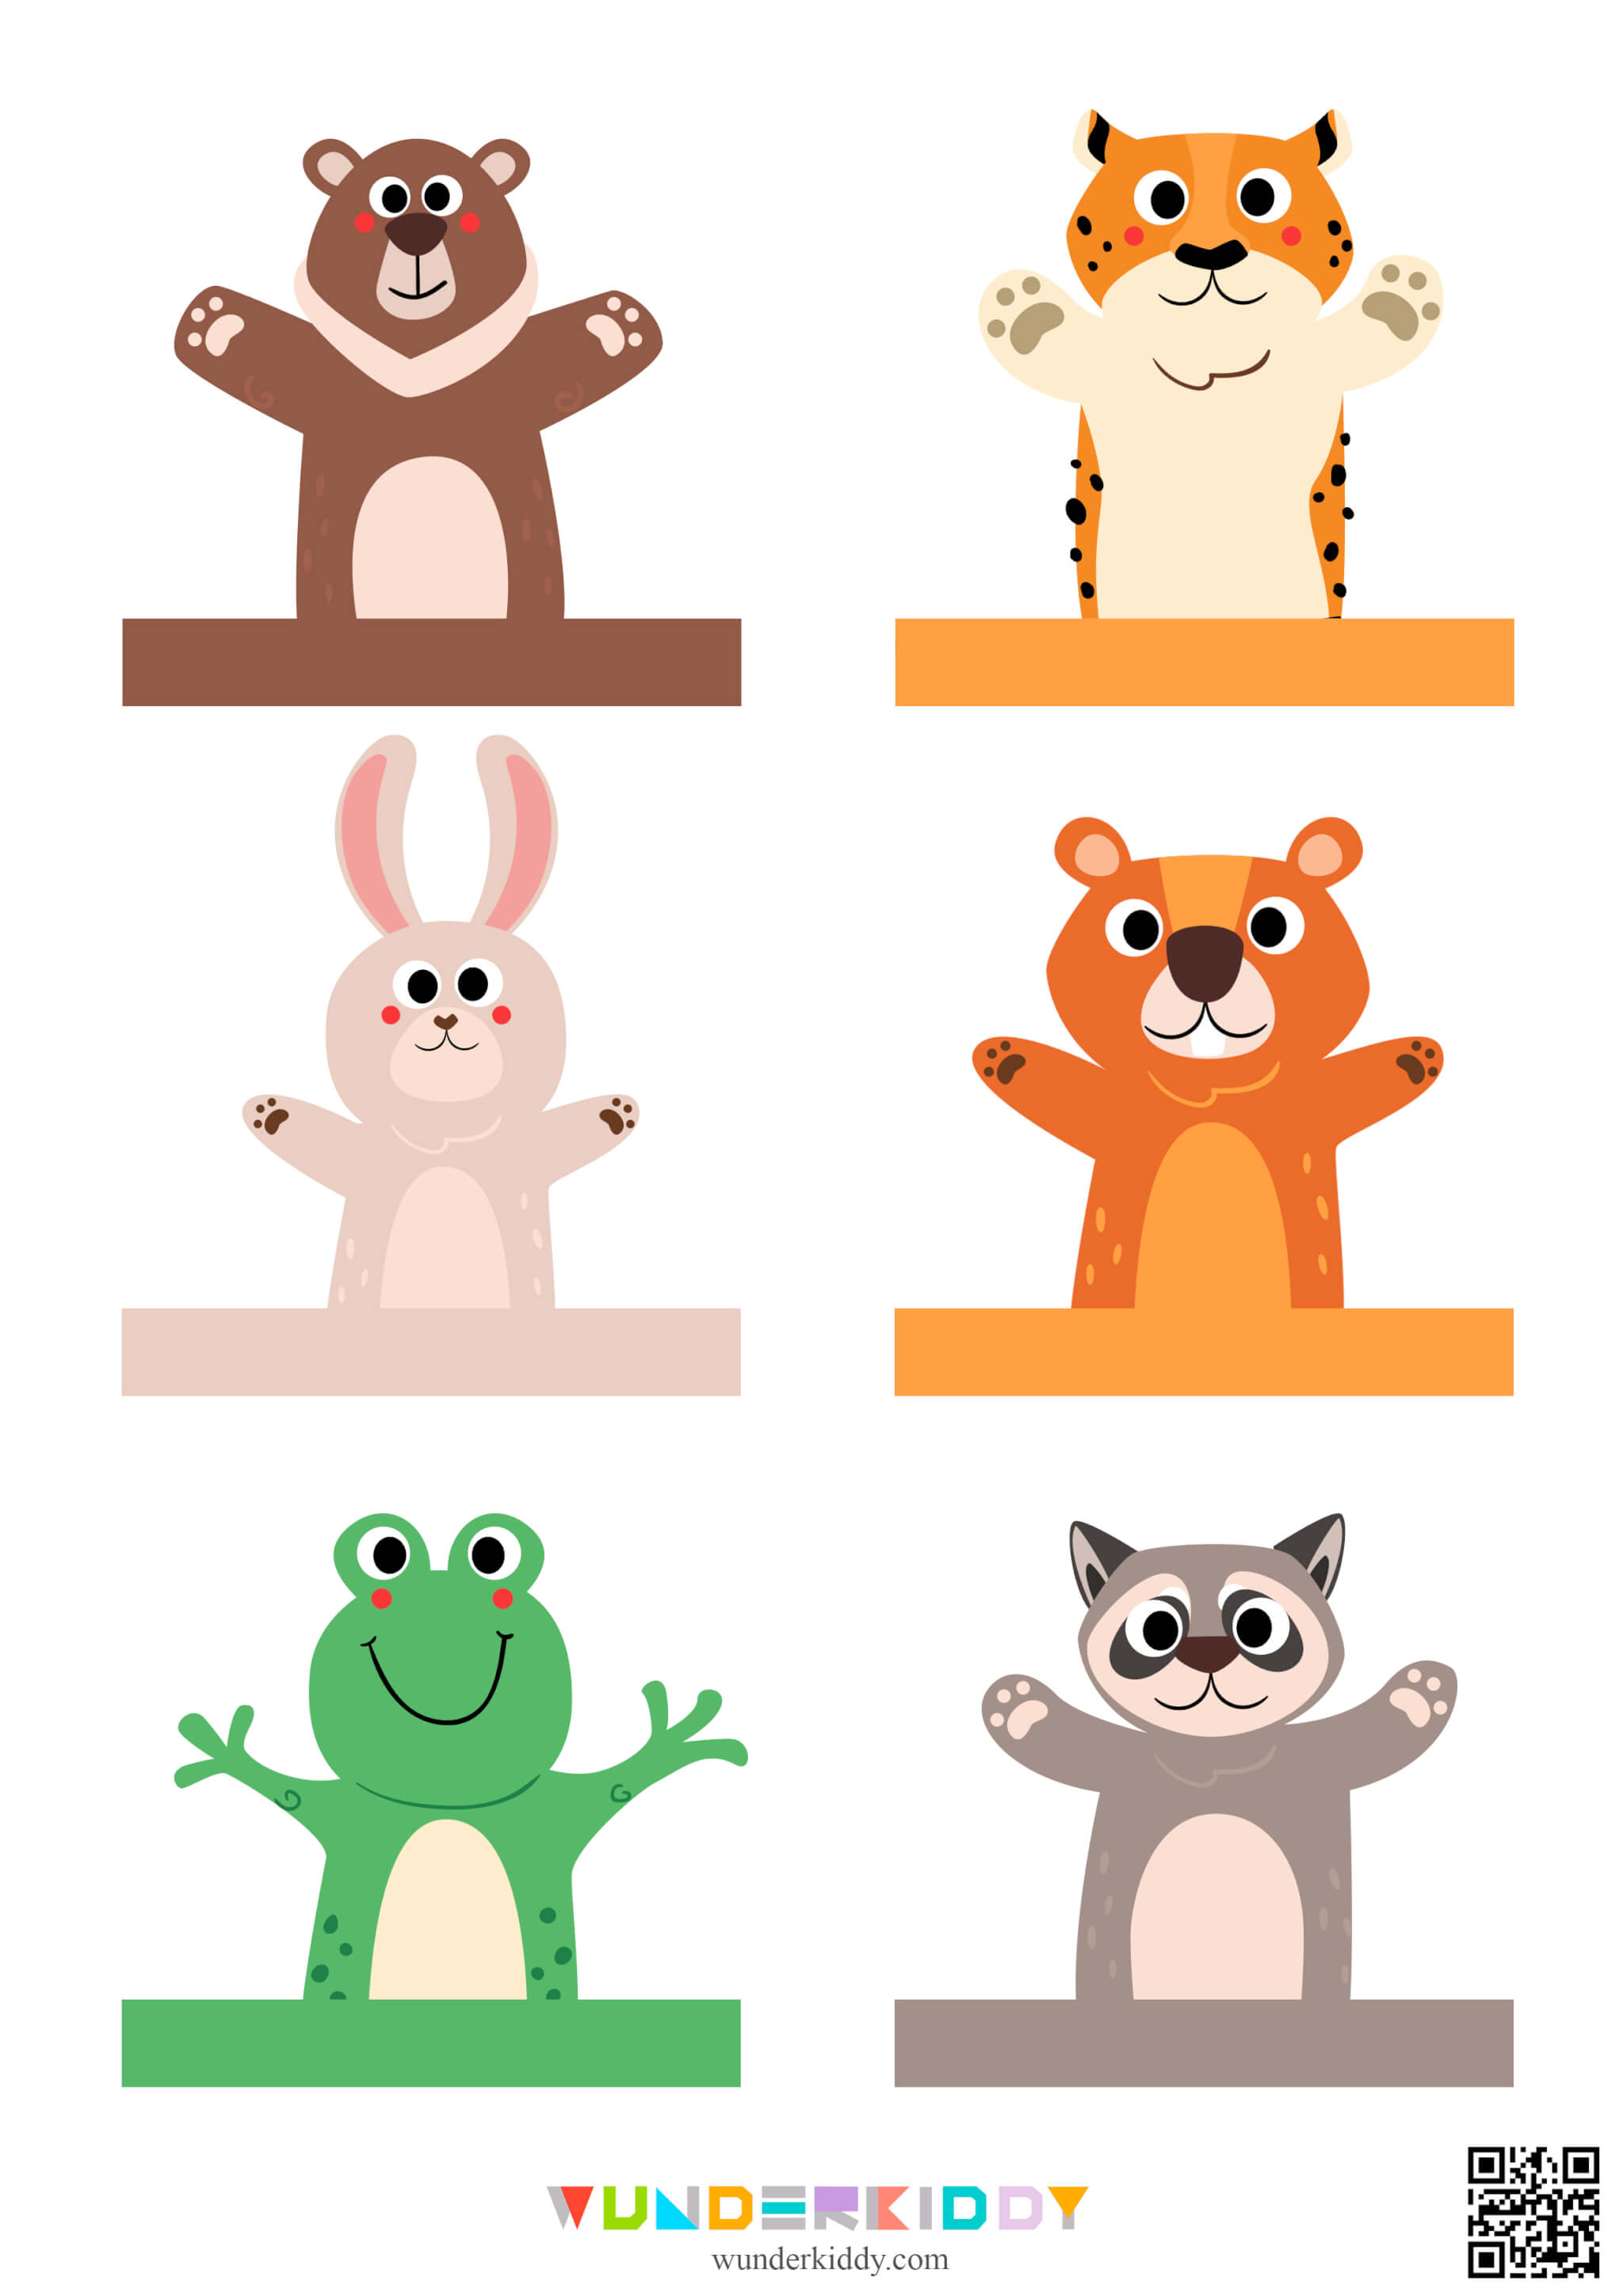 Template «Finger Puppets» - Image 2